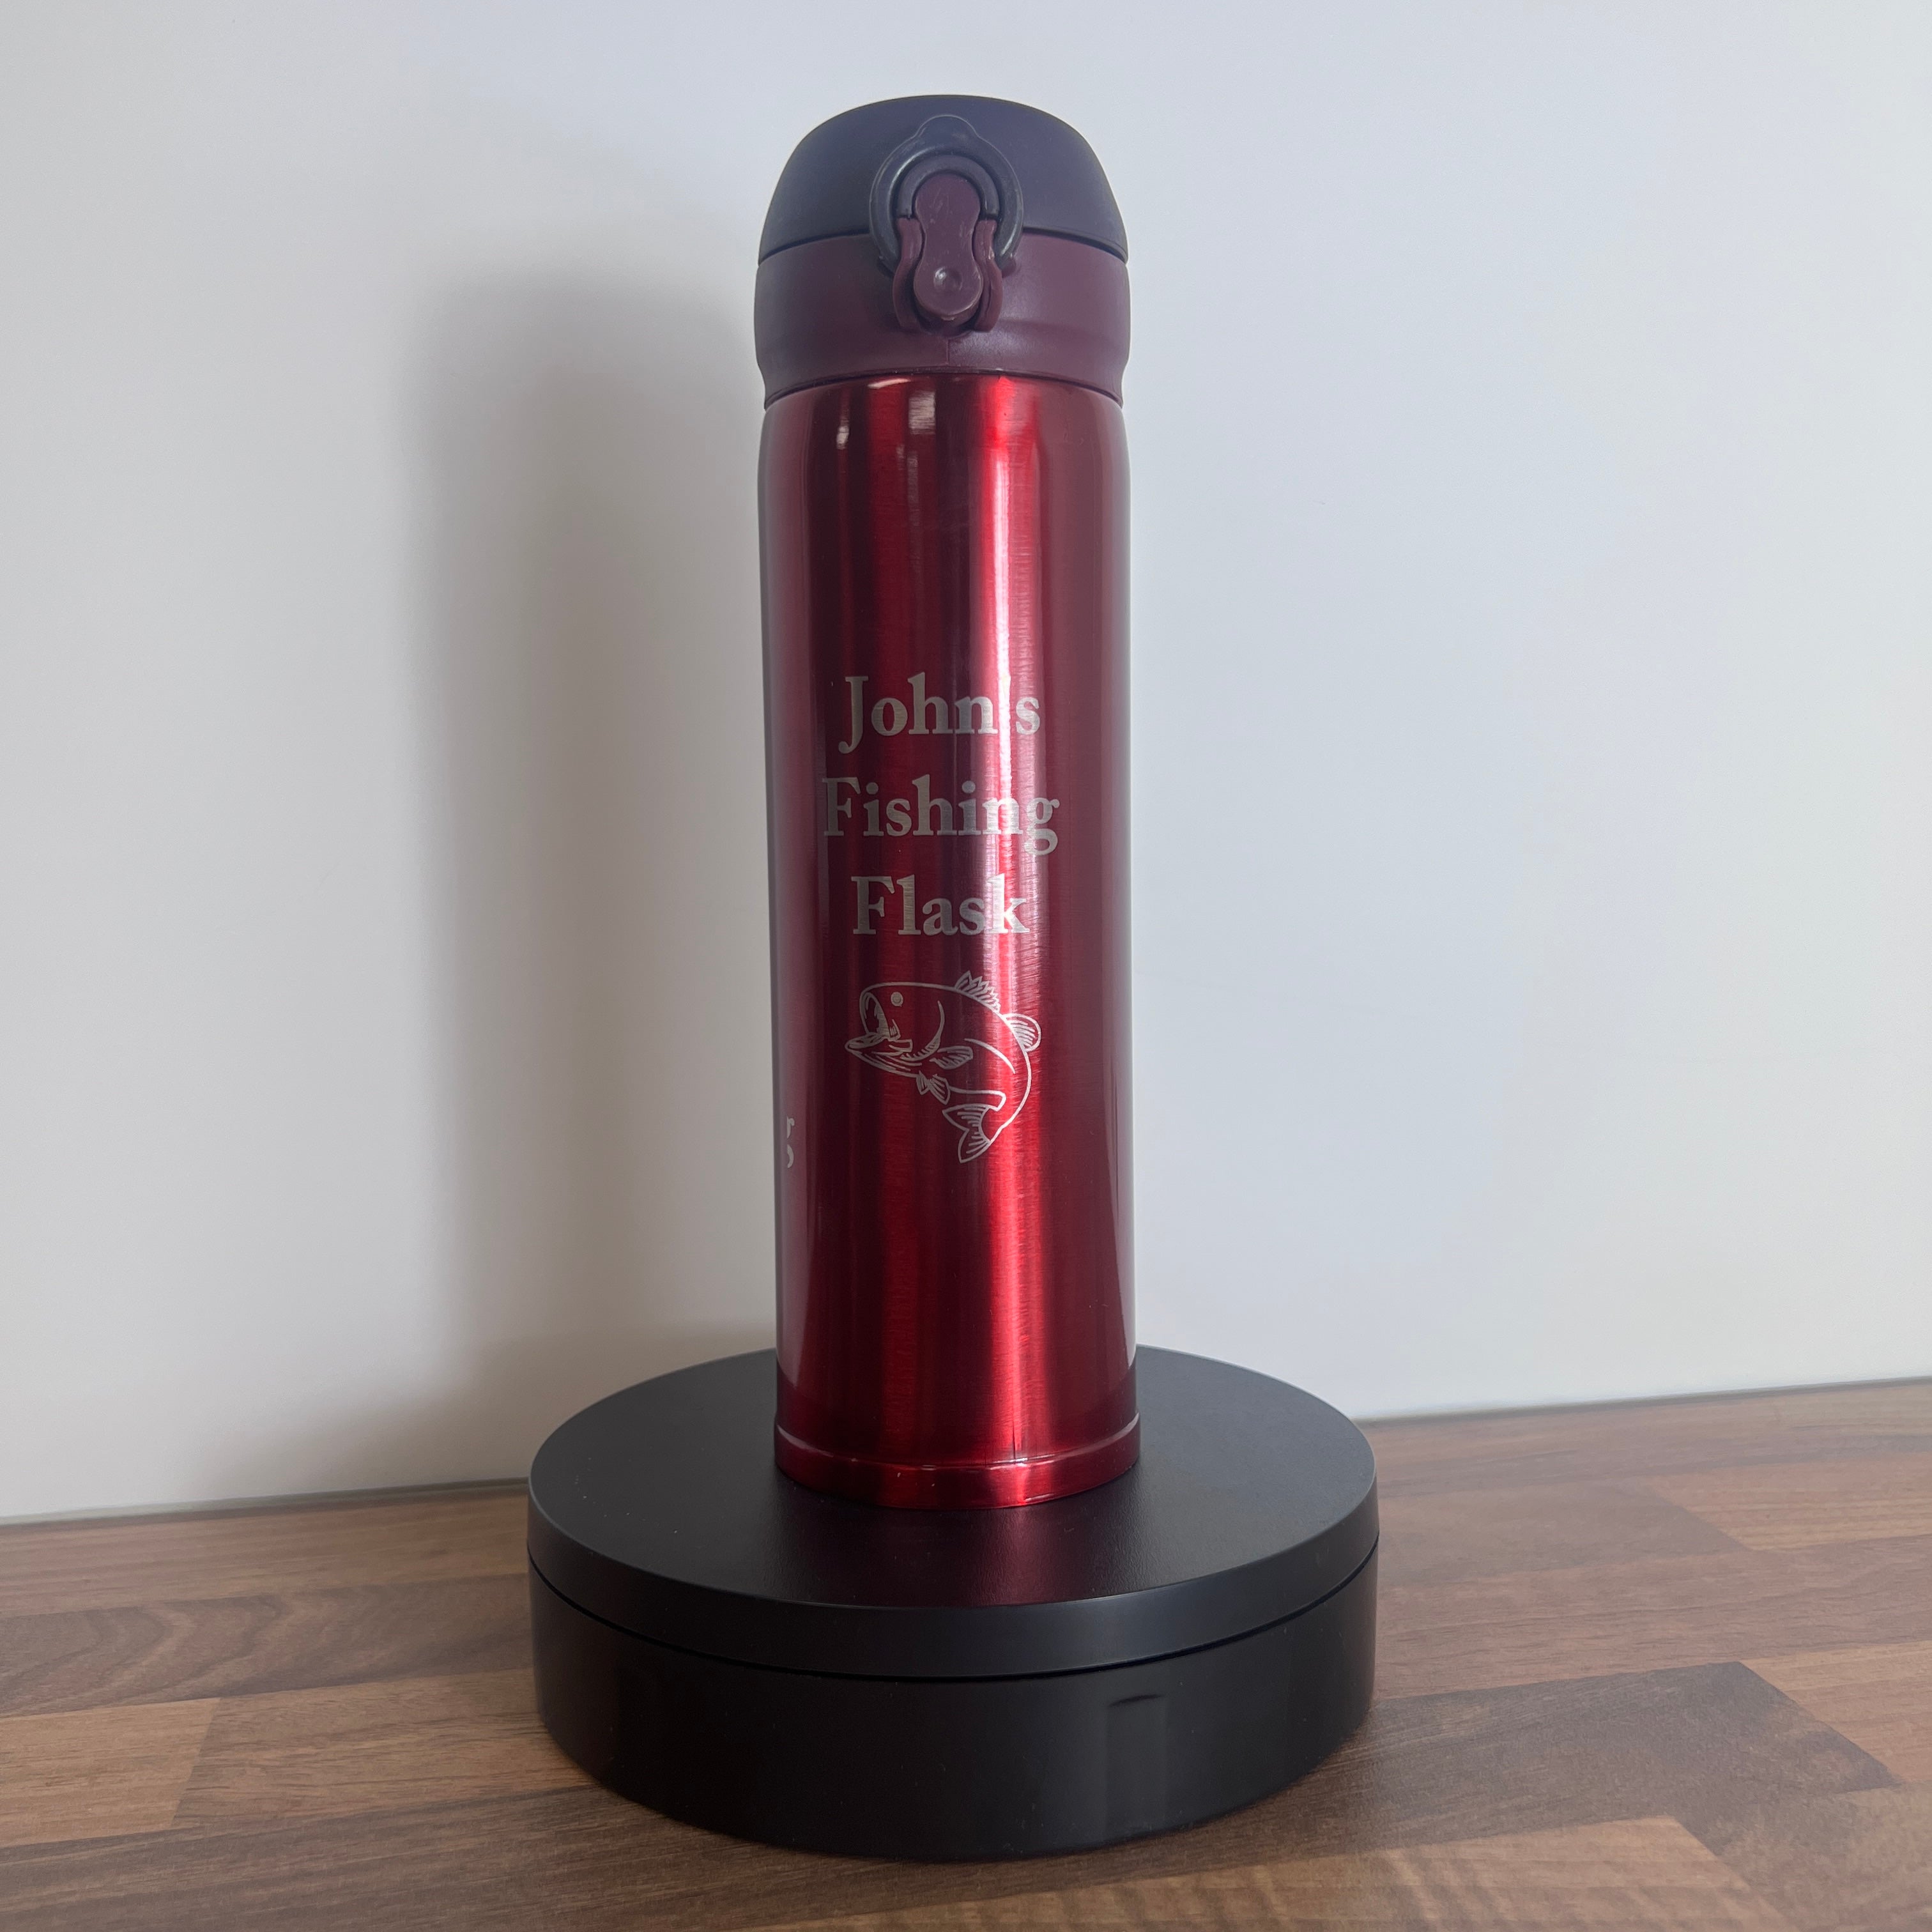 Personalized Slim Red Colored Metal Thermos 280 ml